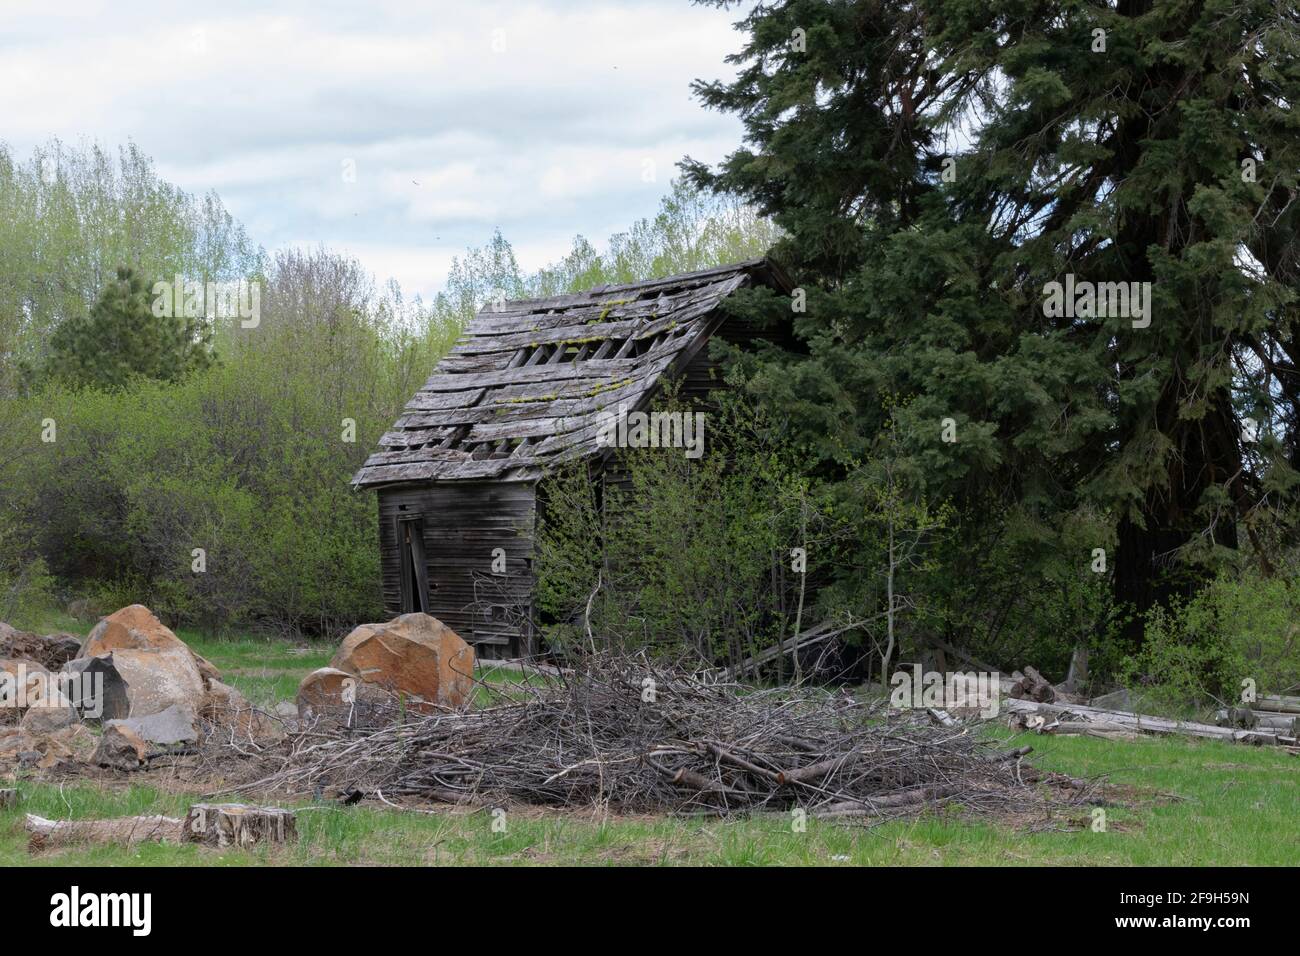 Ruins of an old cabin in rural Klamath County, Oregon. Stock Photo